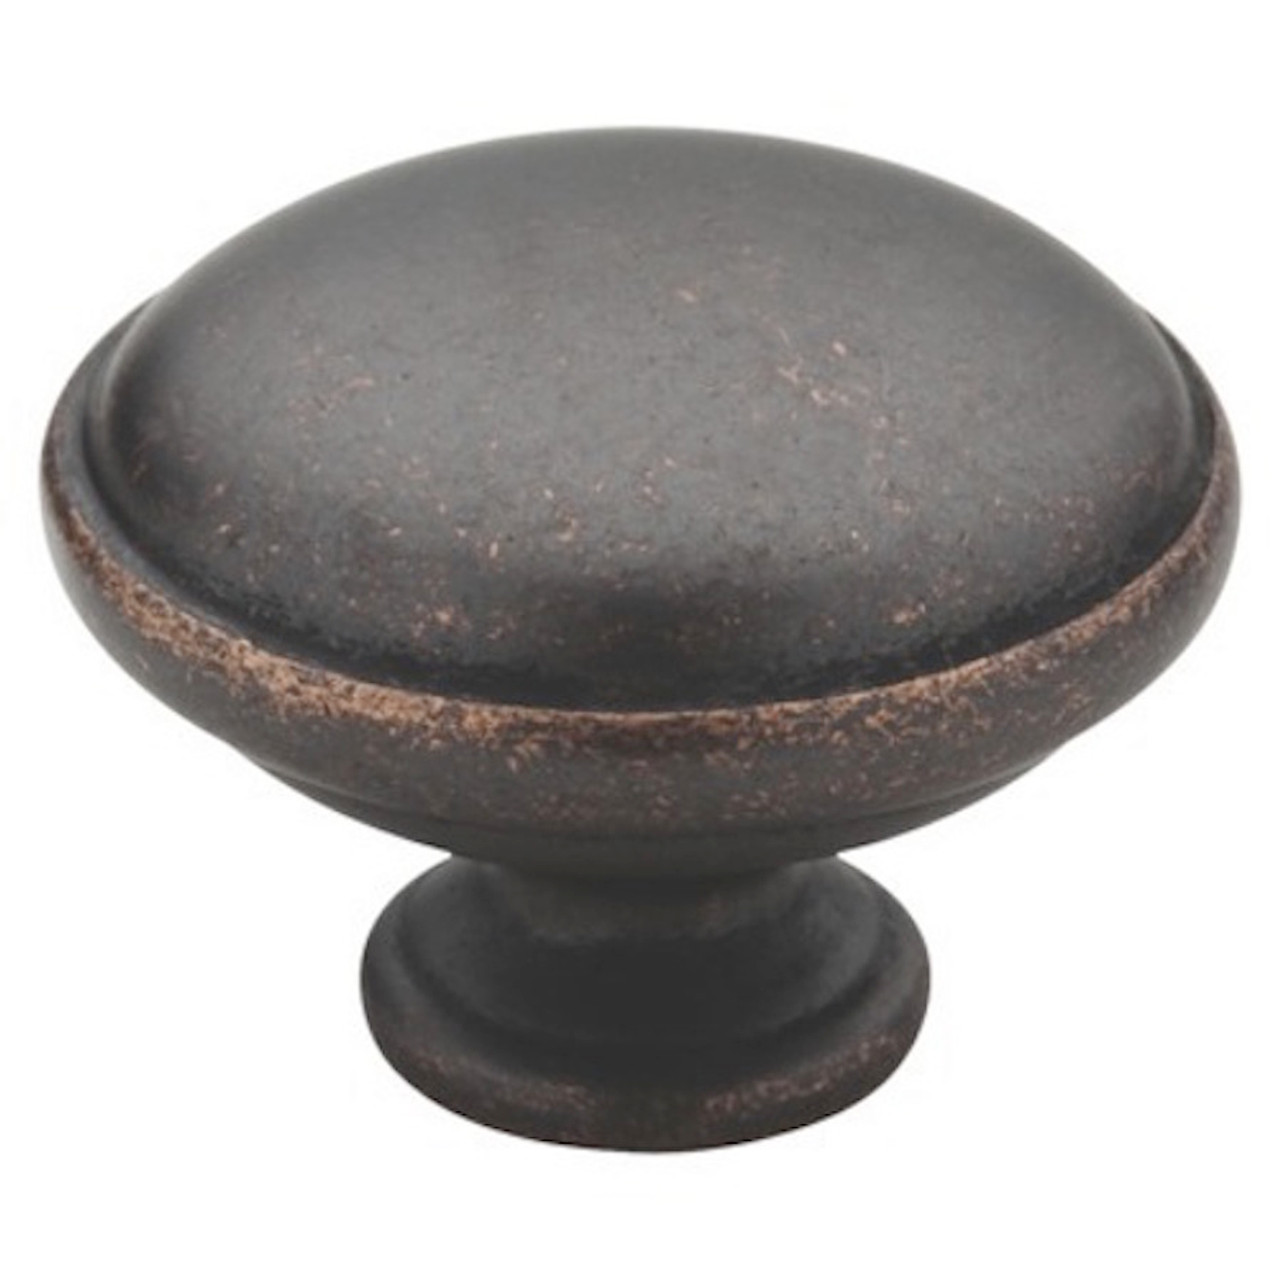 085-03-1051 1 1/4" Round Dome Top Statuary Bronze Cabinet Drawer Pull Knob 10 Pack